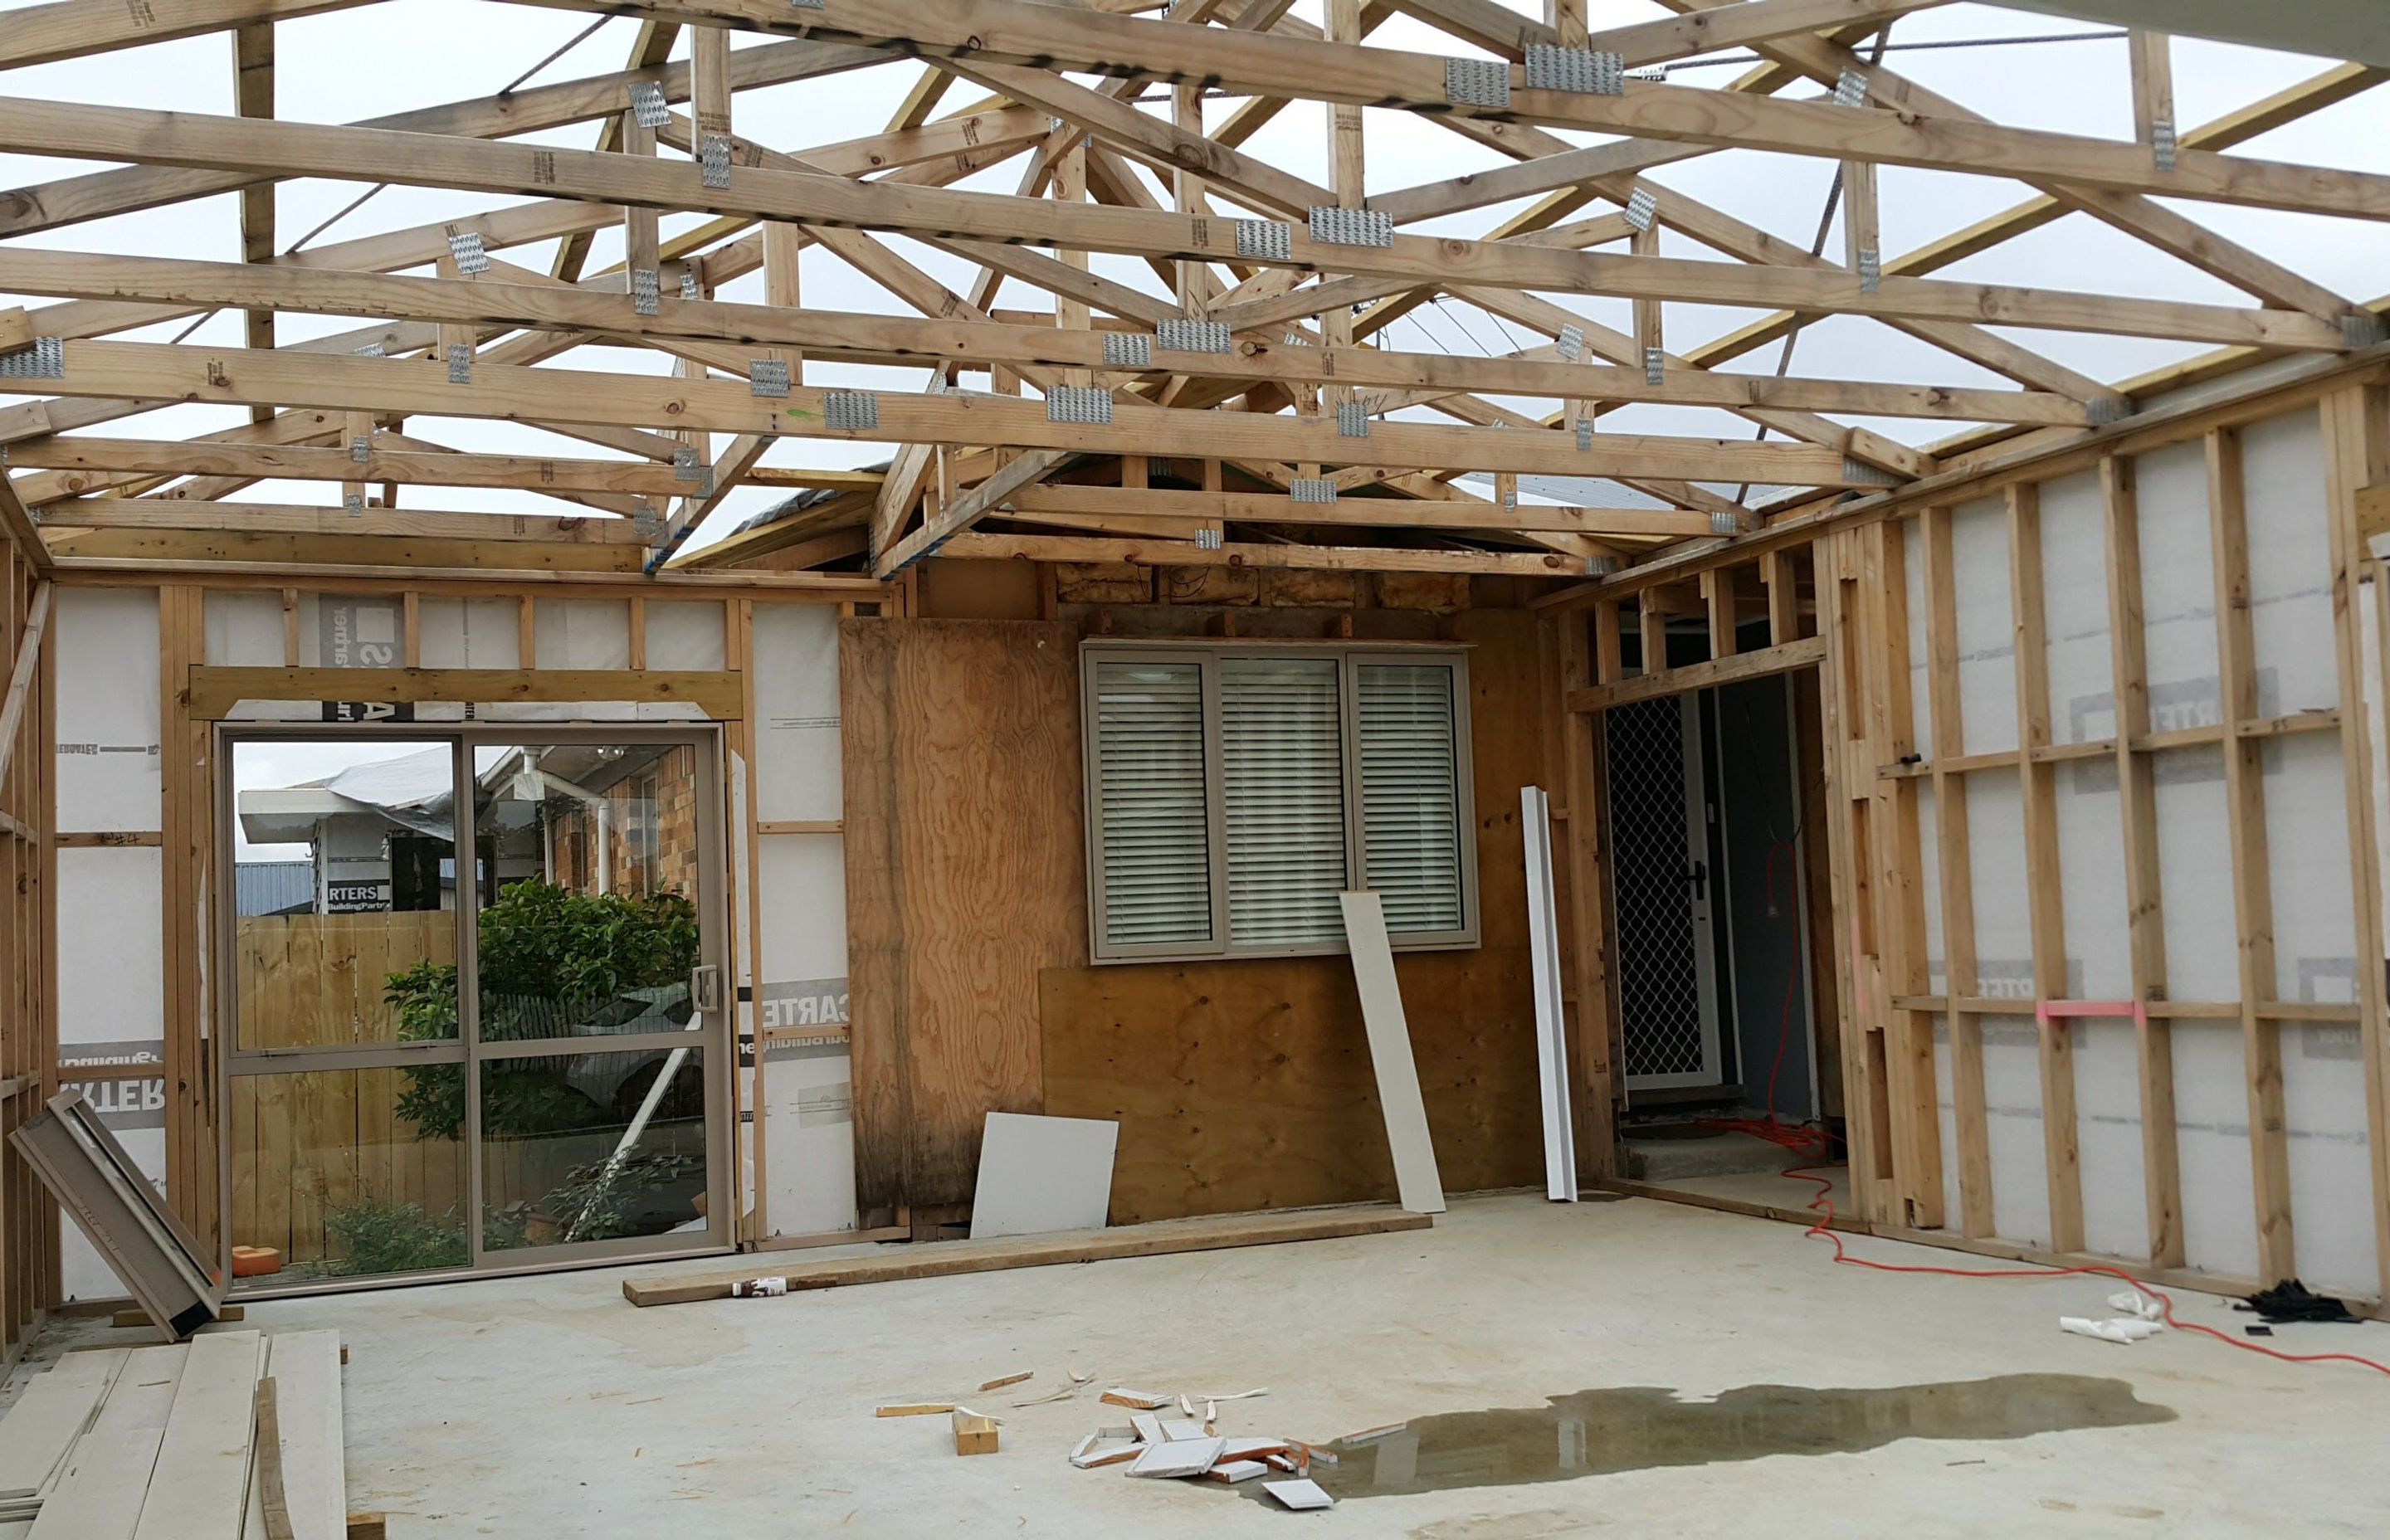 Garage - Frames up, ready for the roof
